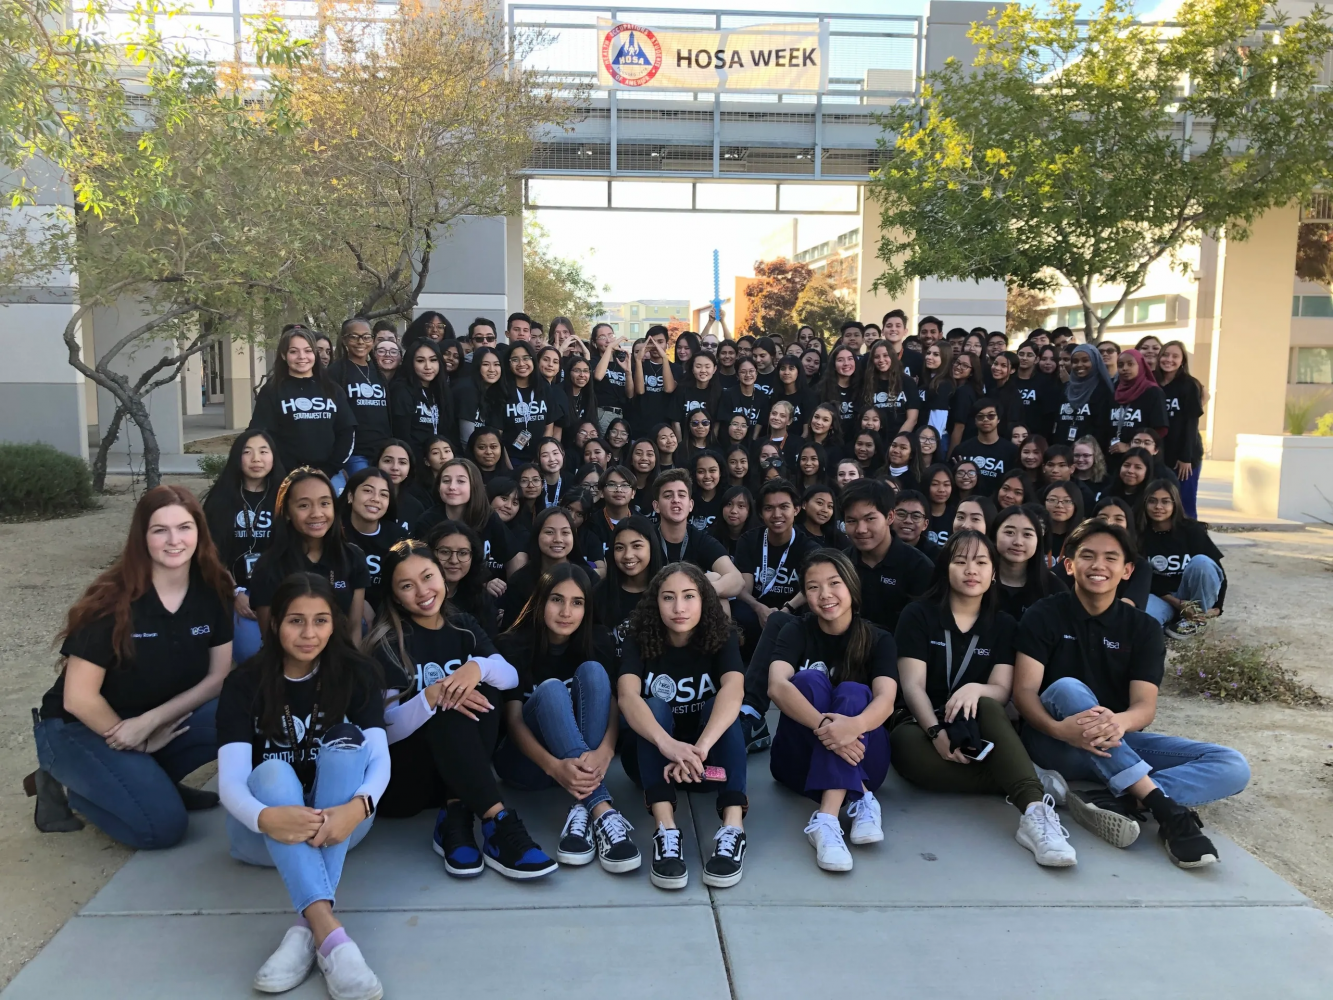 HOSA+students+pose+for+their+annual+group+photo+for+the+yearbook+on+February+19%2C+2020.+Members+are+currently+selecting+their+areas+to+compete+in.+%E2%80%9CI+enjoyed+it+in+person+a+lot+during+my+freshman+year+and+can%E2%80%99t+wait+to+compete+again+this+April.%E2%80%9D+%0A